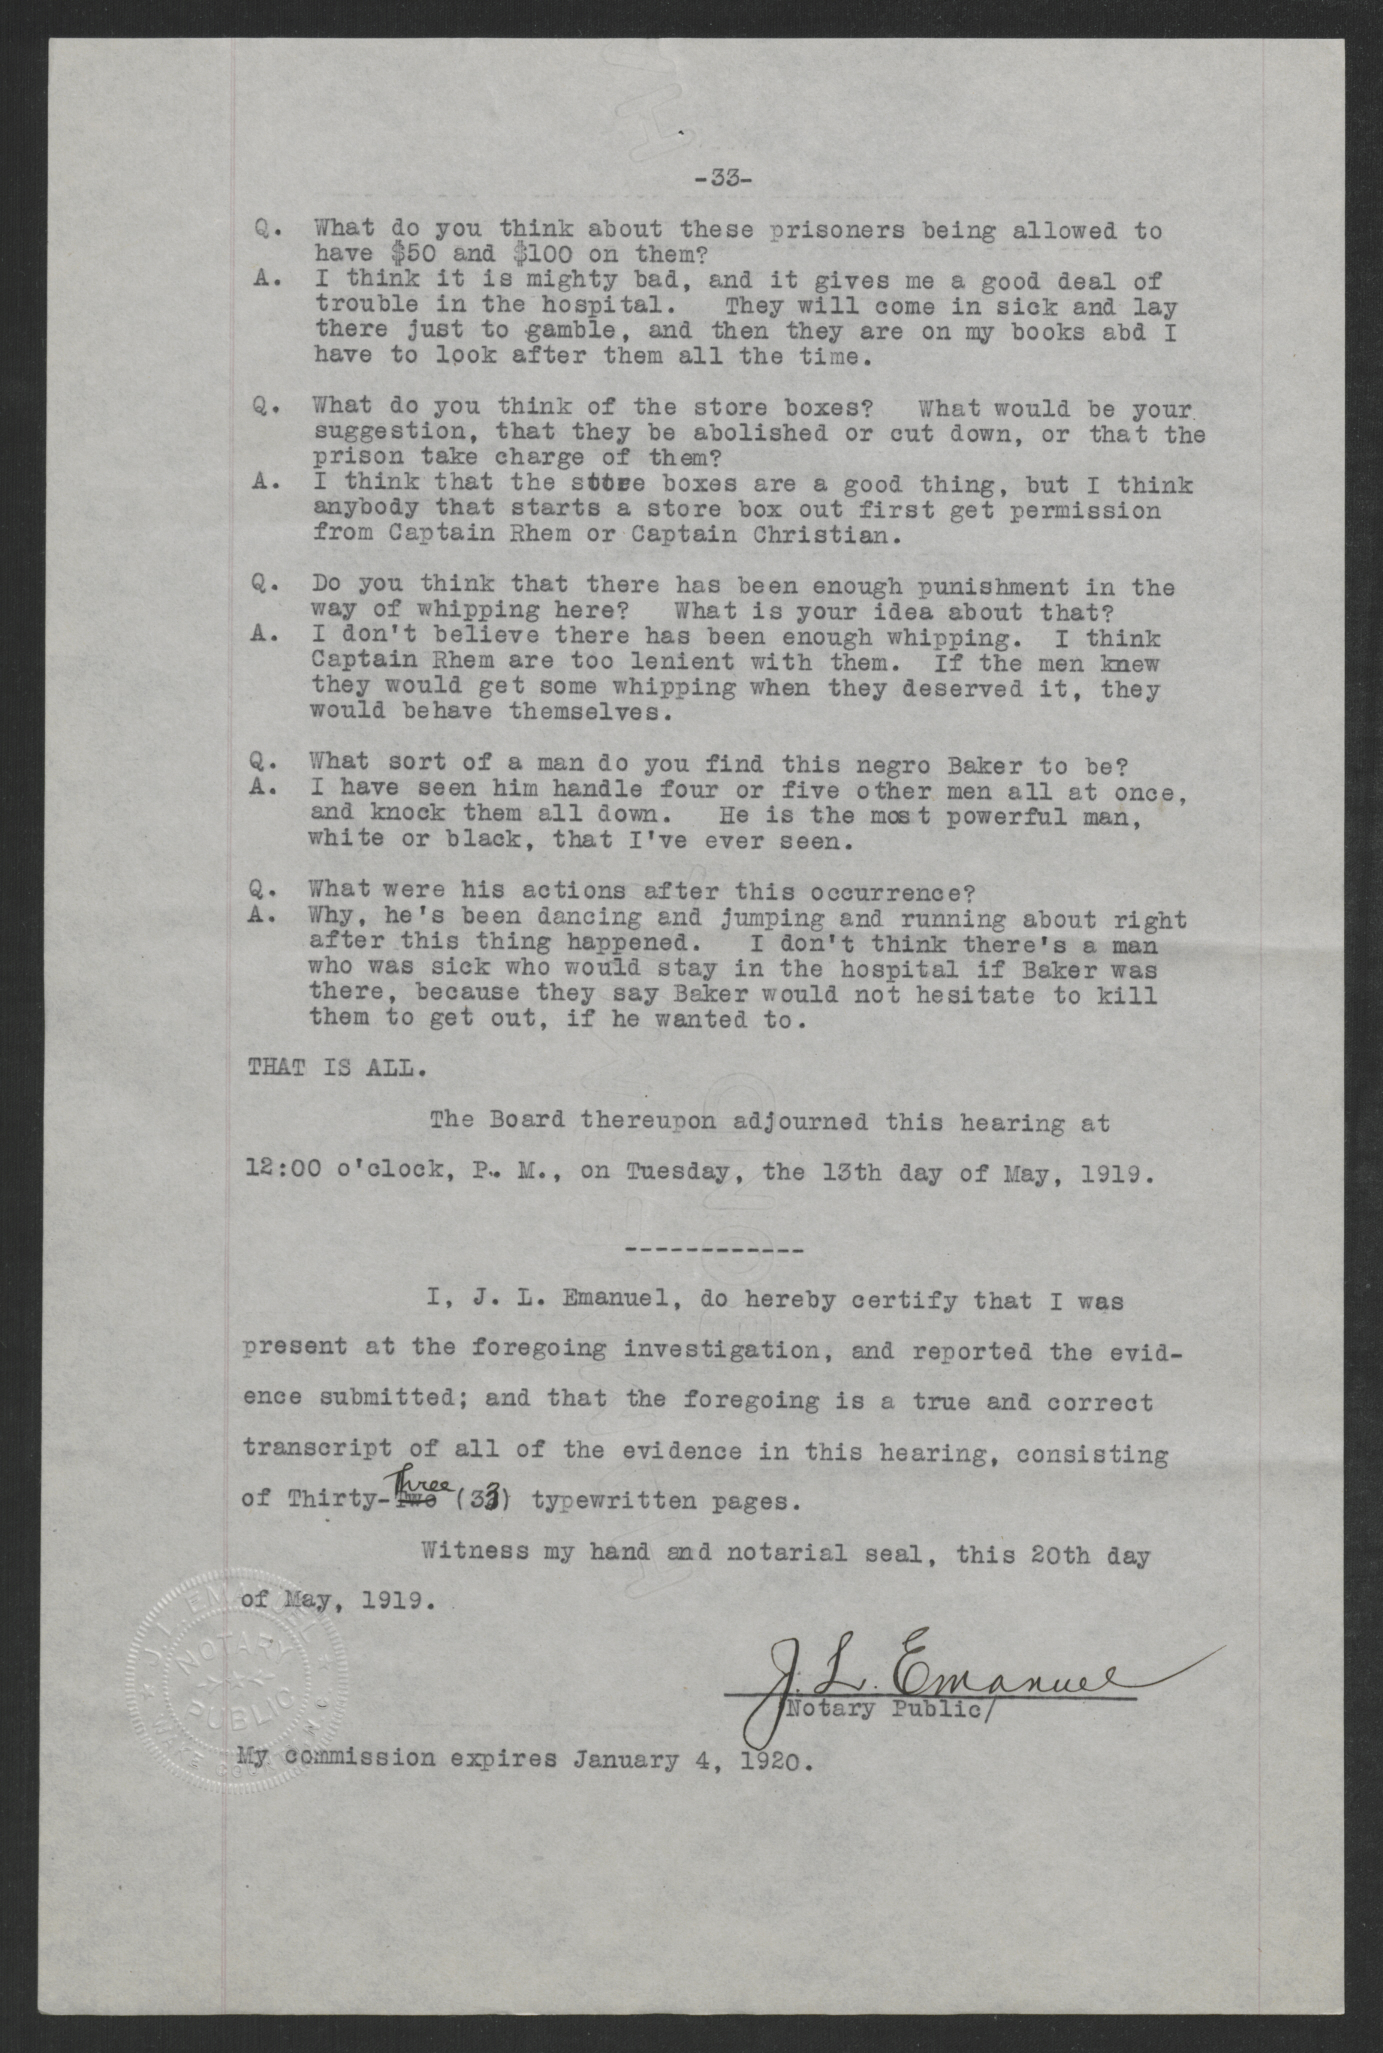 Investigation of the Charges Made by Inmates of the State Prison Farm to Earl E. Dudding, 12 May 1919, page 33